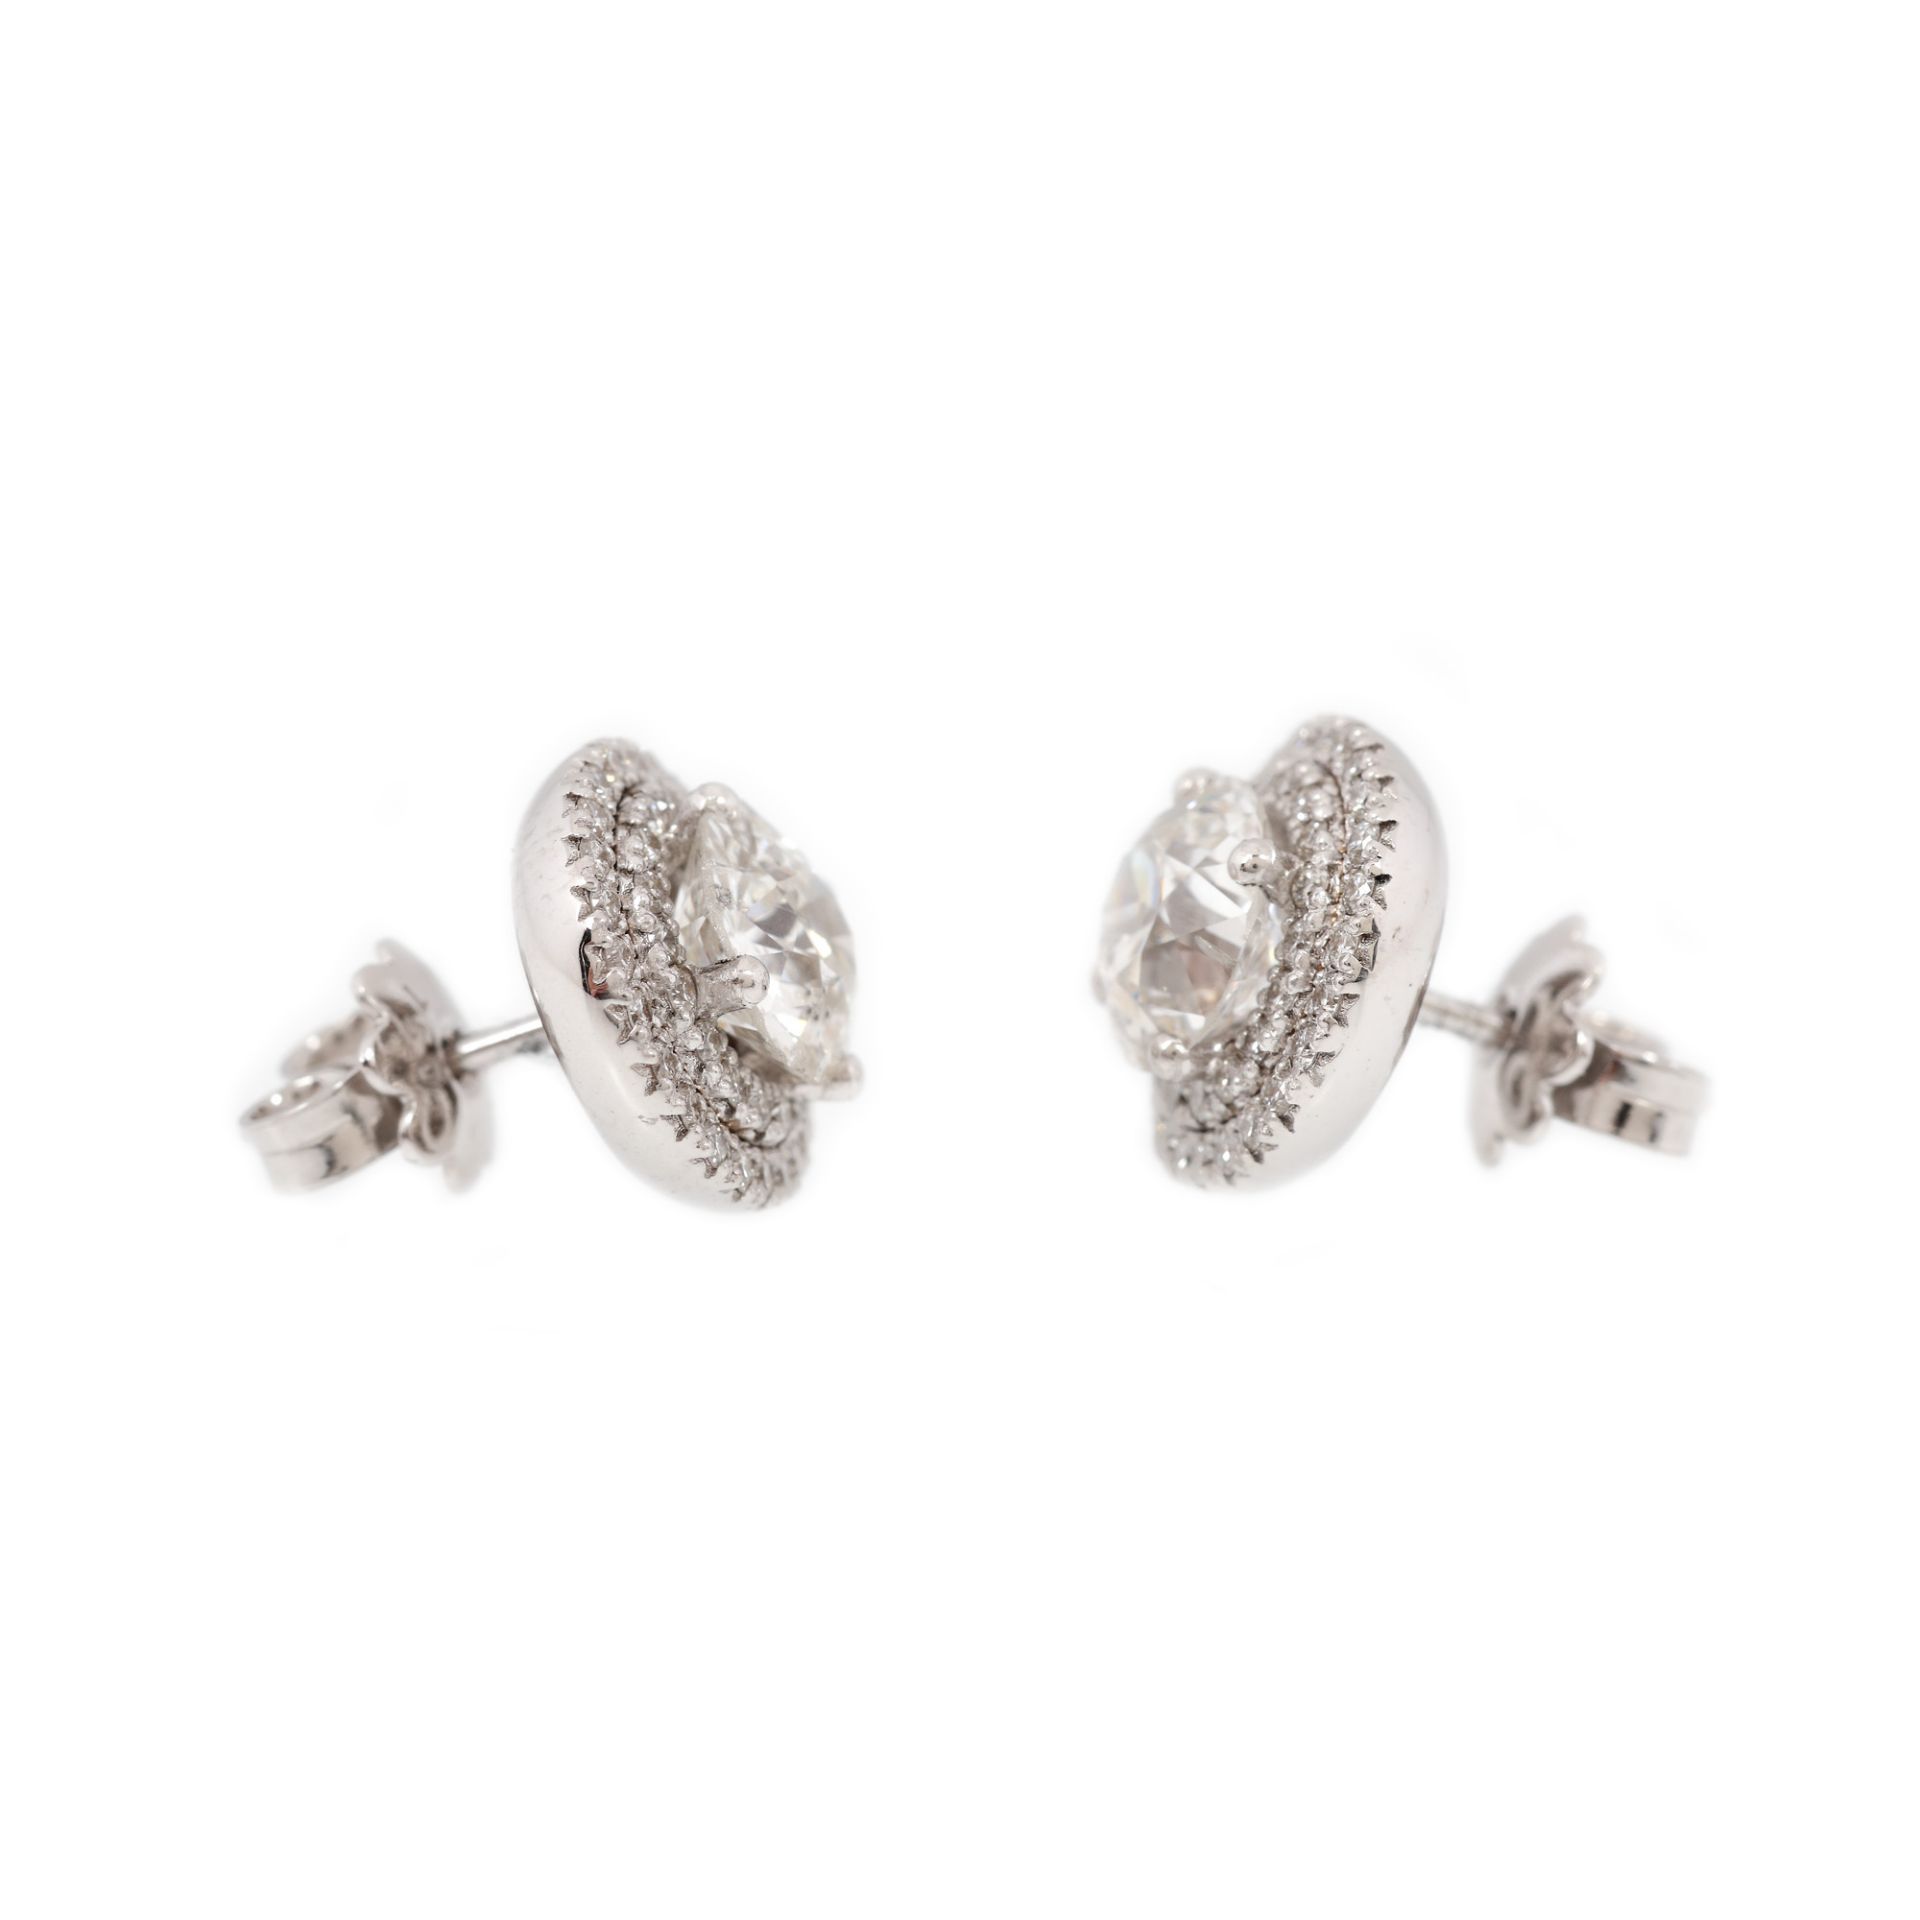 Earrings, white gold, decorated with diamonds - Image 2 of 2